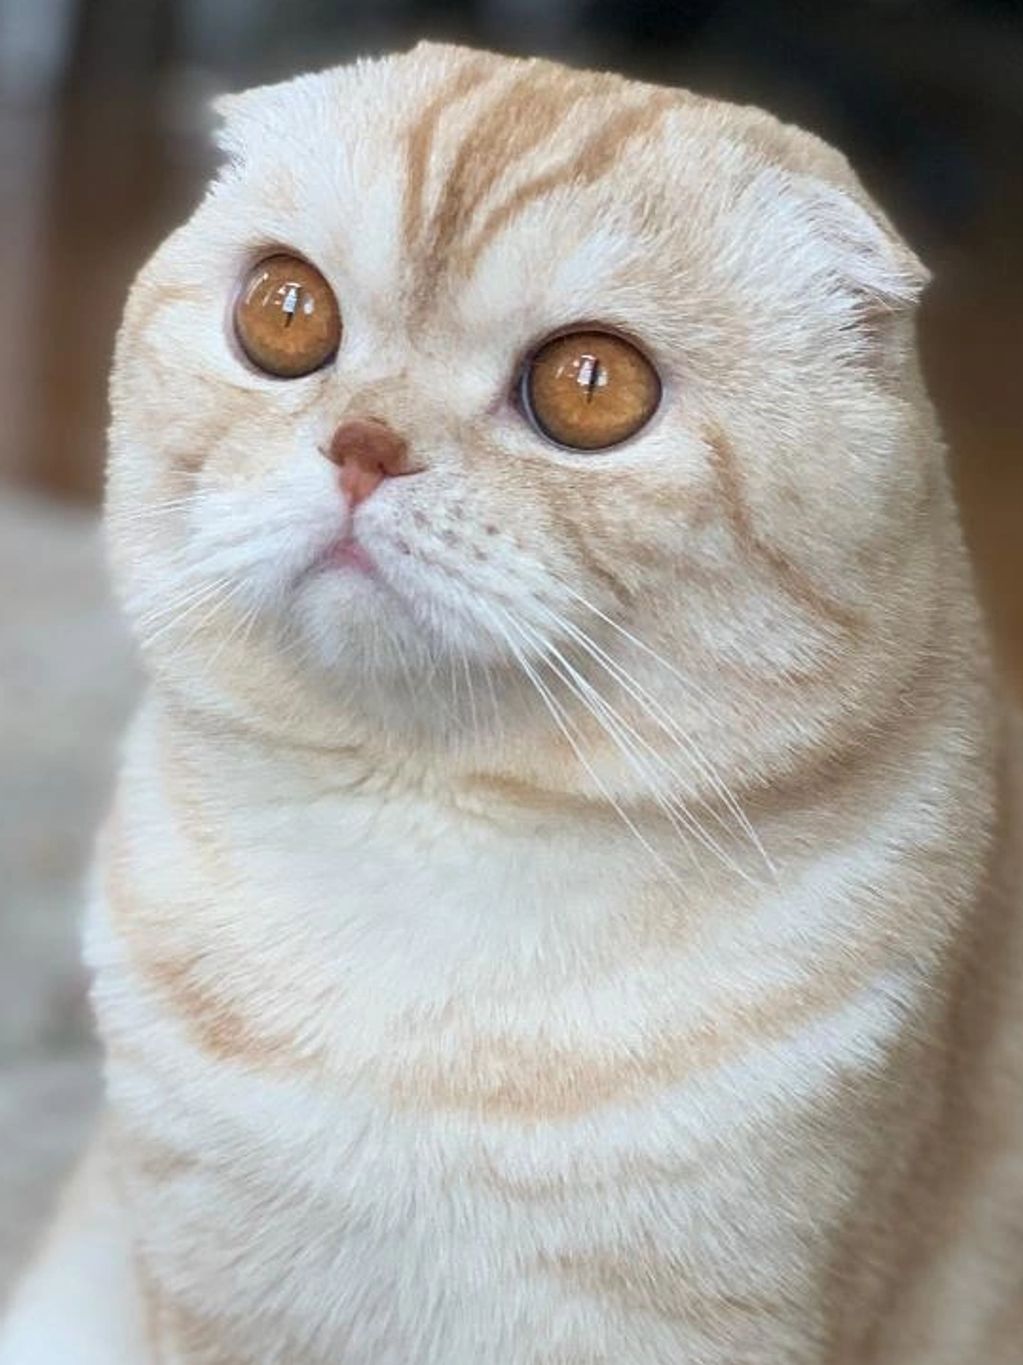 Excellent ear, eye, and neck development of a Scottish Fold cat.